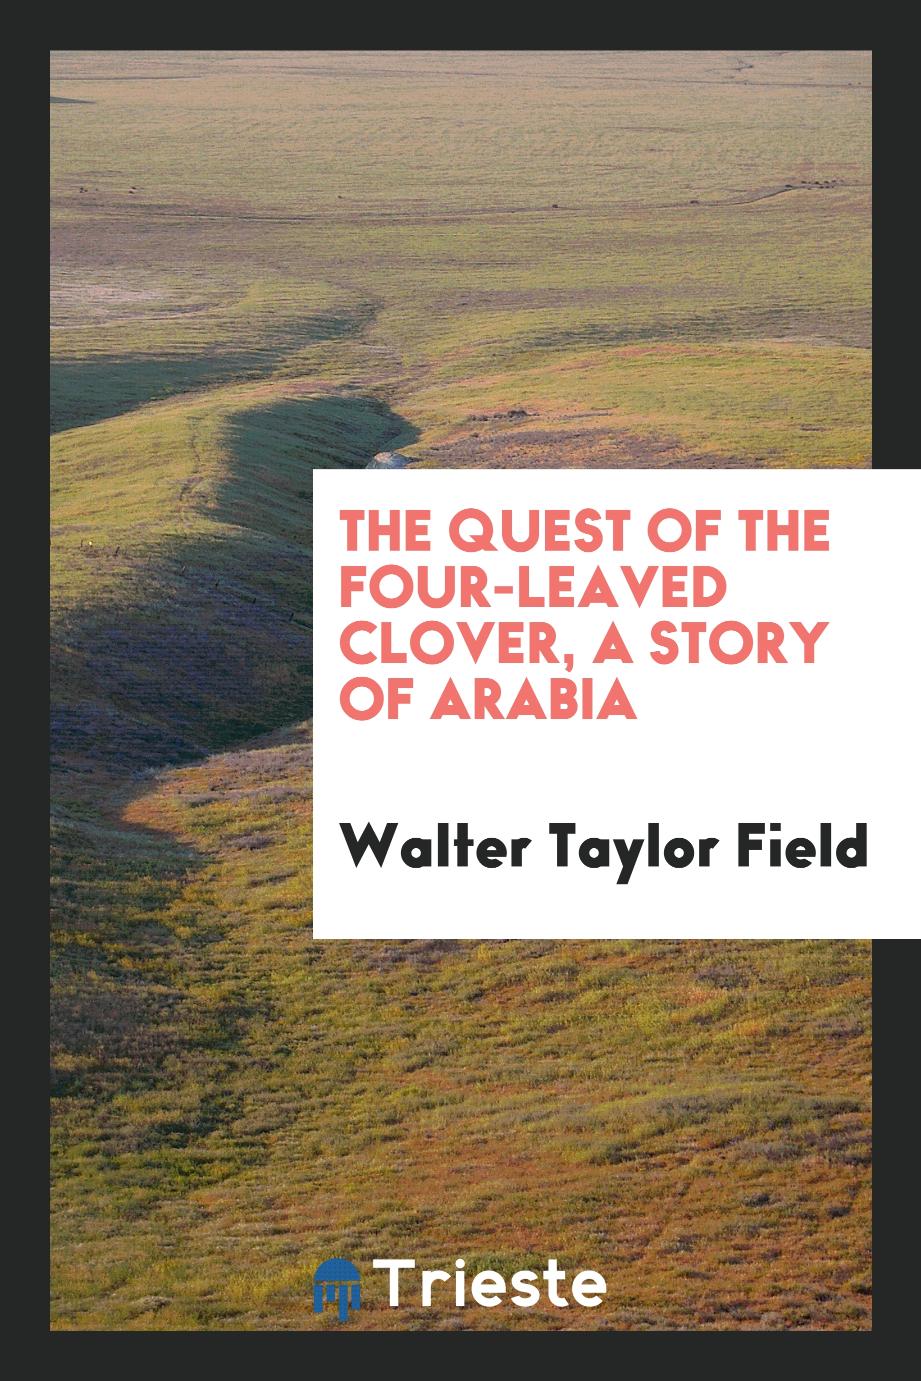 The quest of the four-leaved clover, a story of Arabia